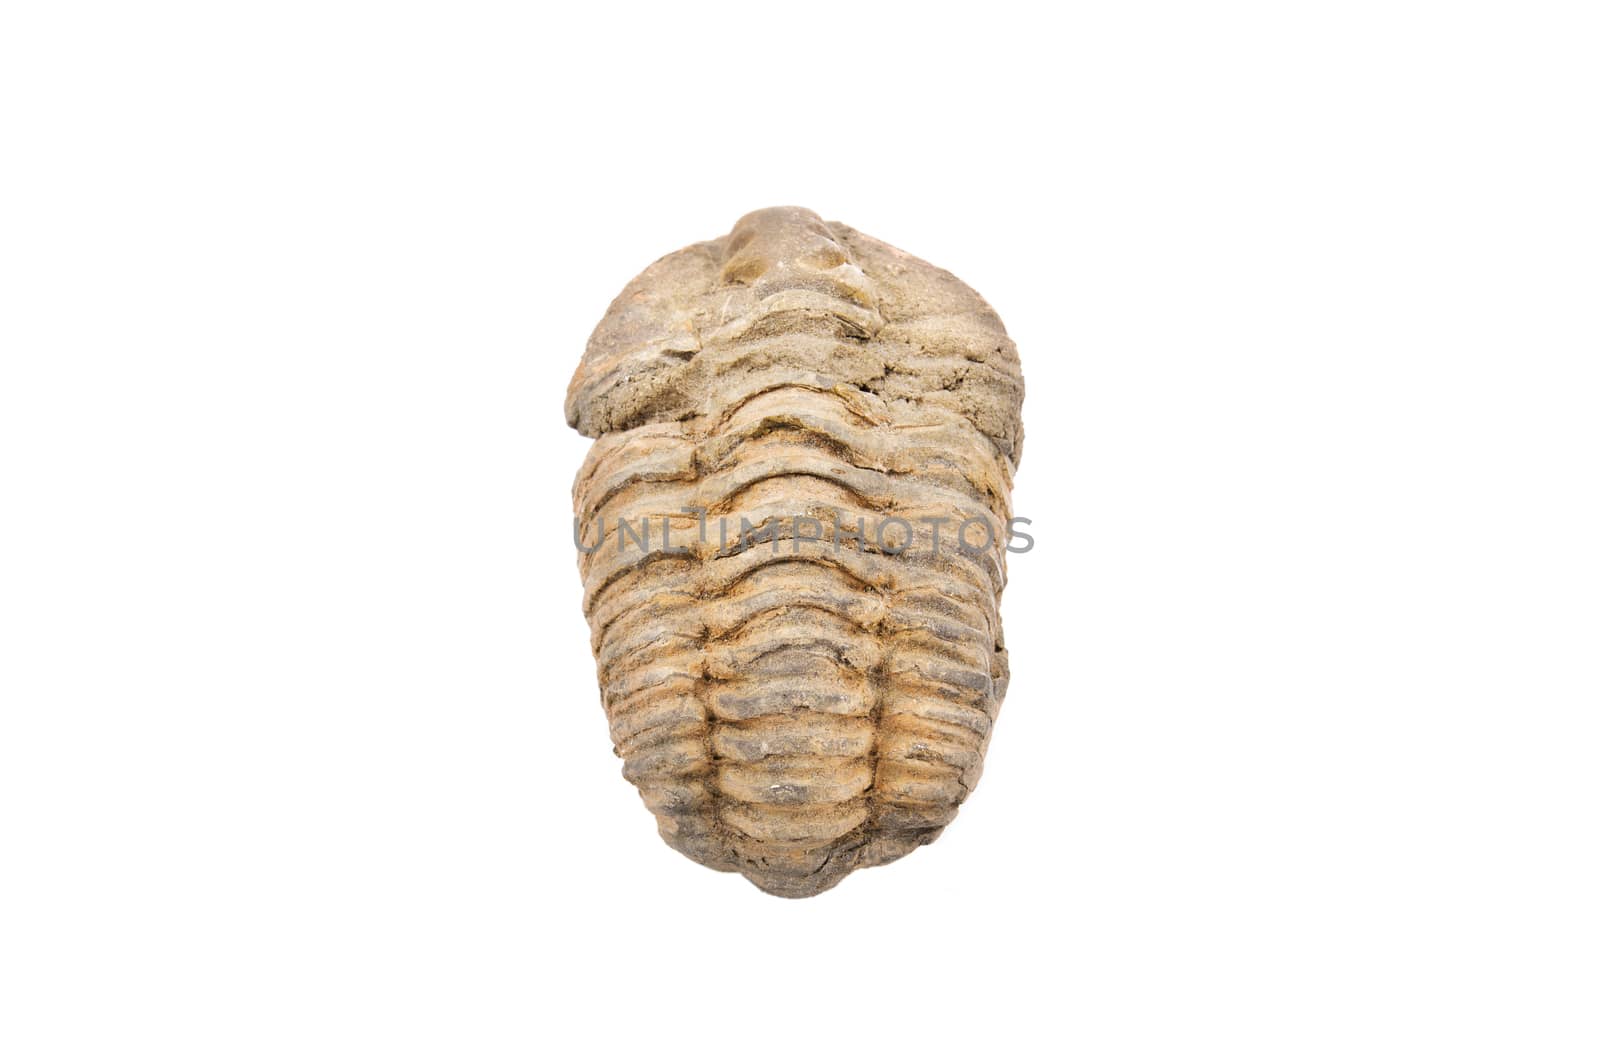 Trilobite fossil on white isolated background